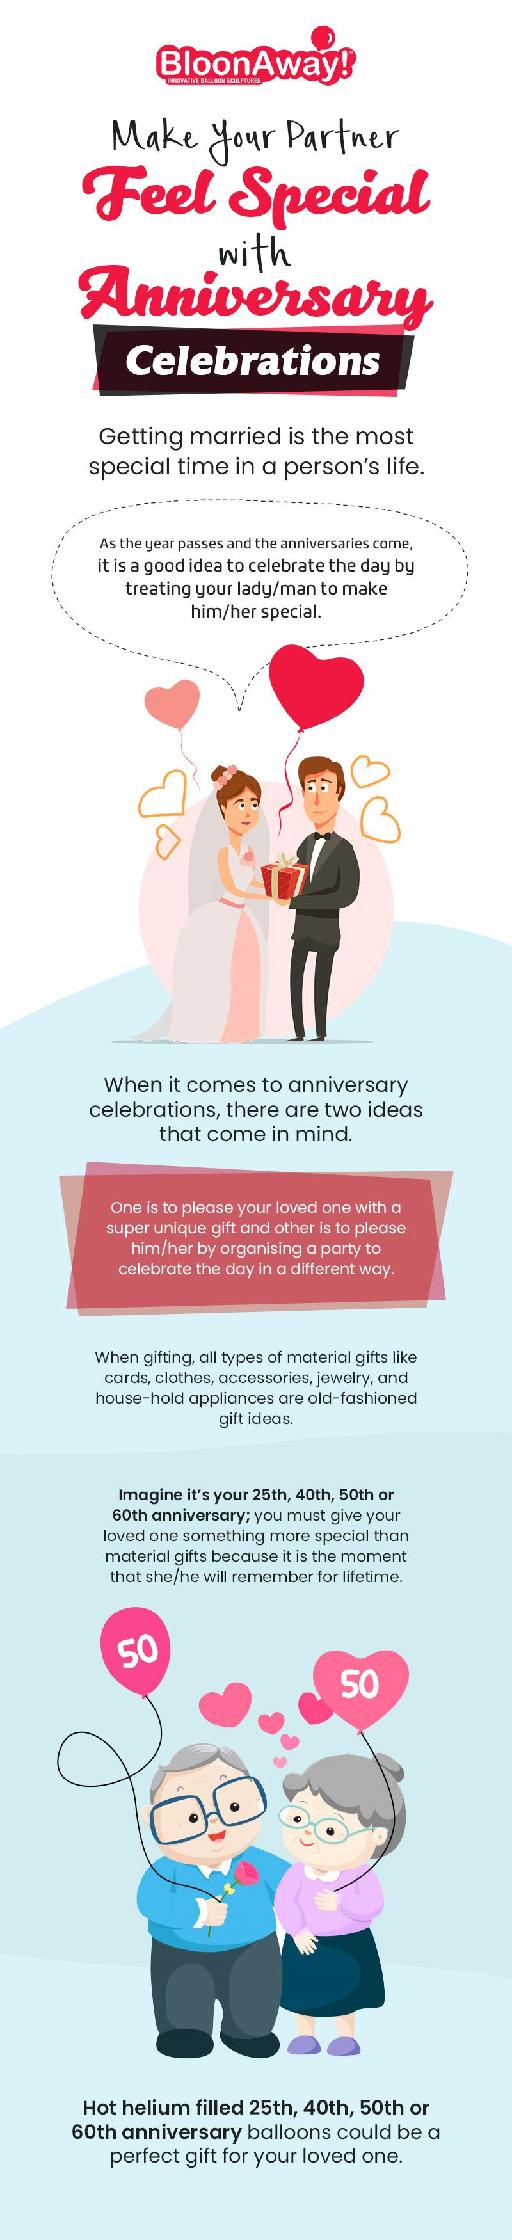 Make Your Partner Feel Special with Anniversary Celebrations